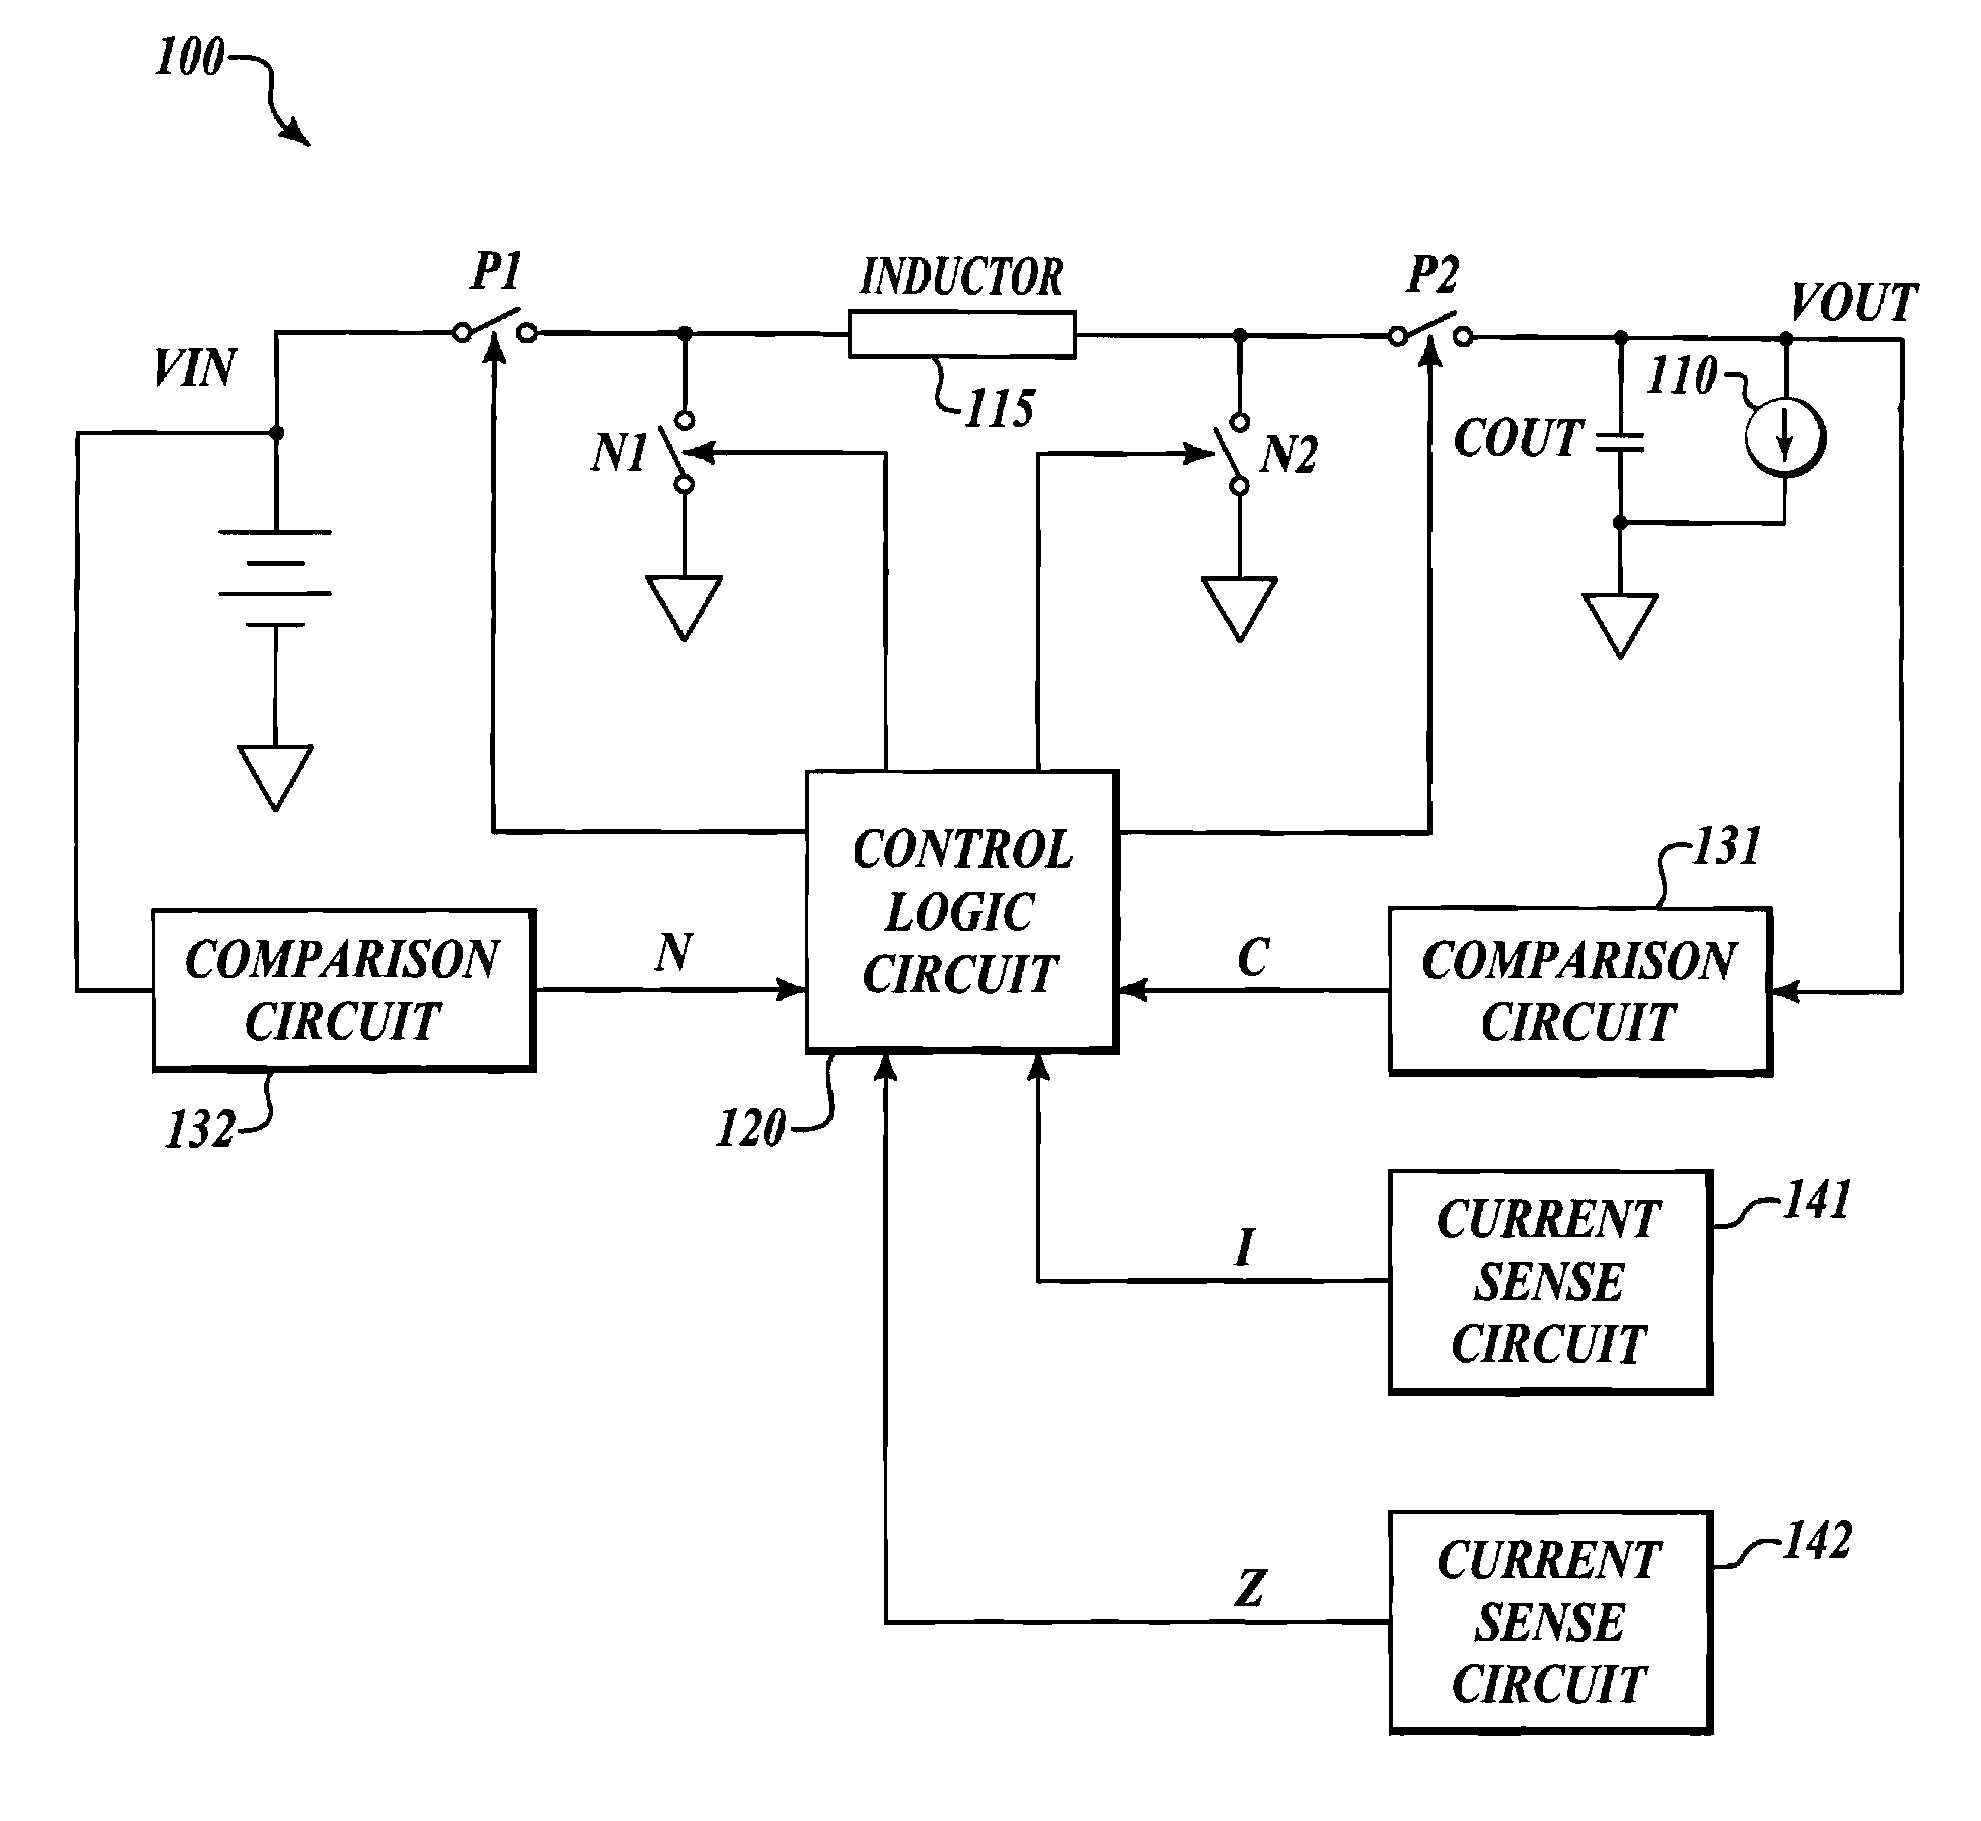 Apparatus and method for PFM buck-or-boost converter with smooth transition between modes